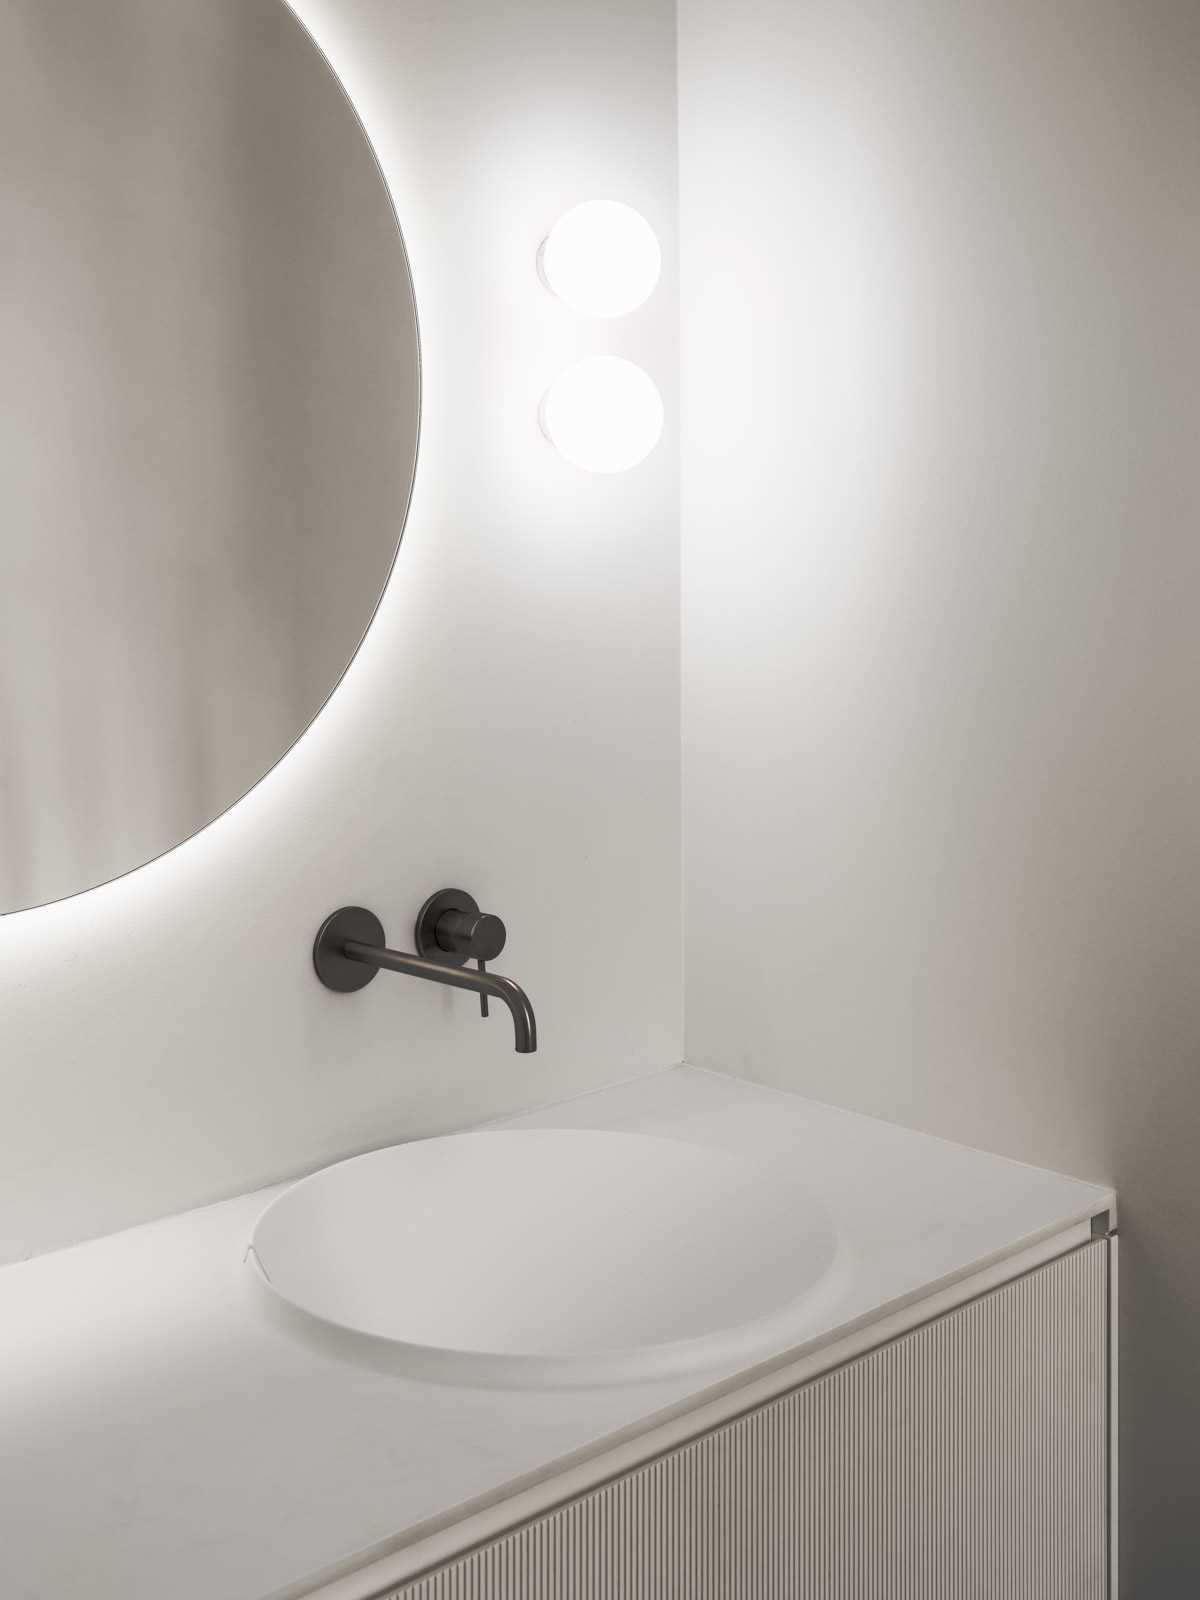 In this modern bathroom, there's a round backlit mirror mounted on the wall above a white vanity with a textured front. Next to the vanity area is the shower which includes a shelving niche.